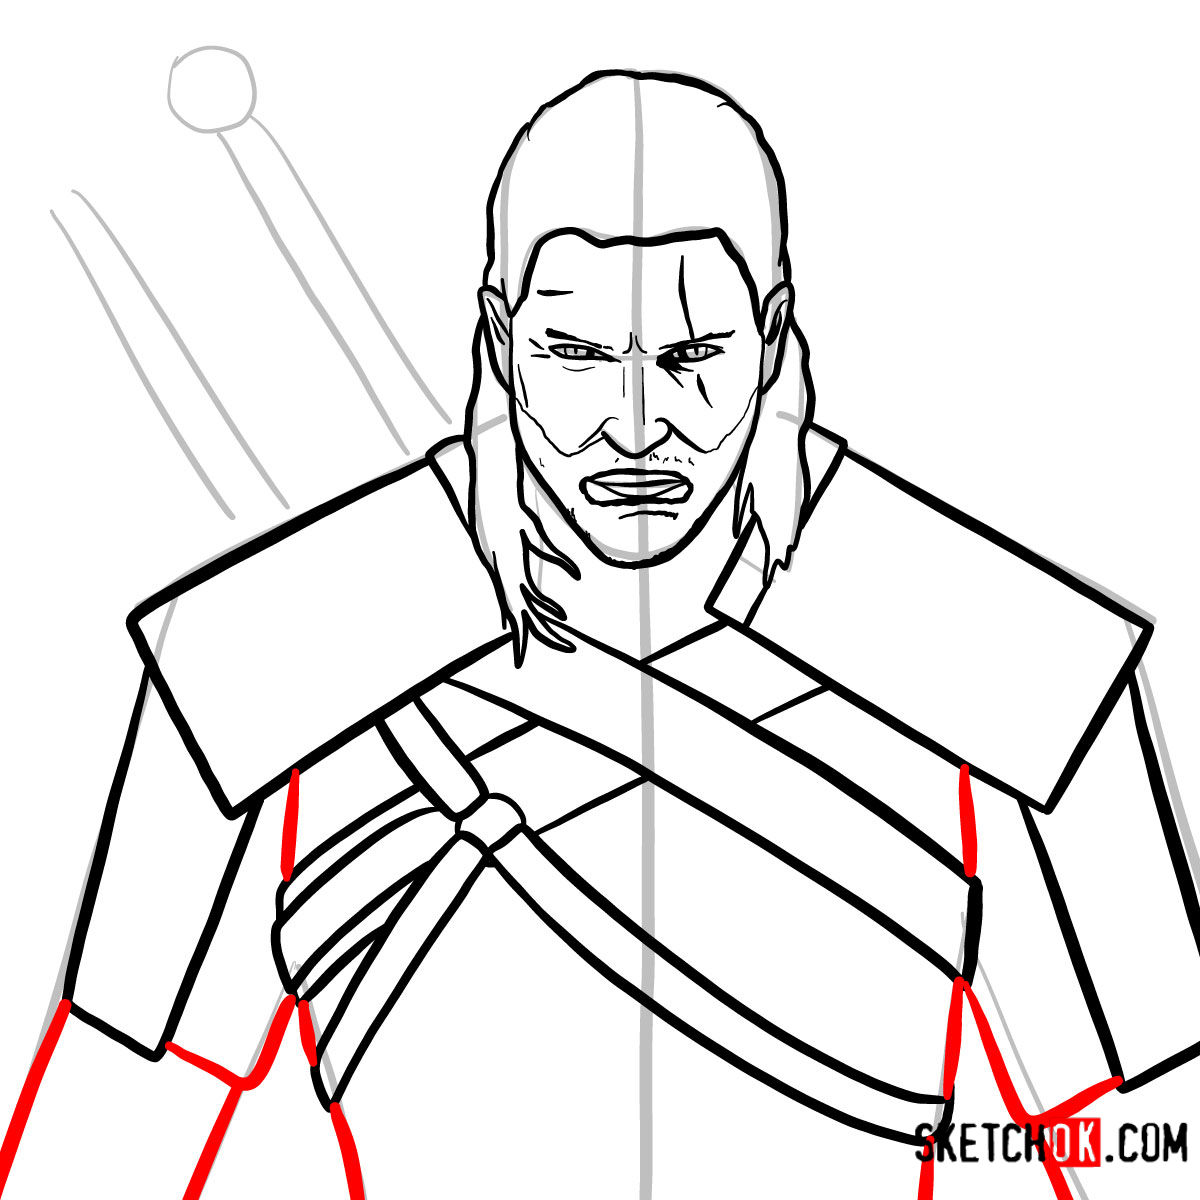 How to draw Geralt of Rivia | The Witcher - step 13